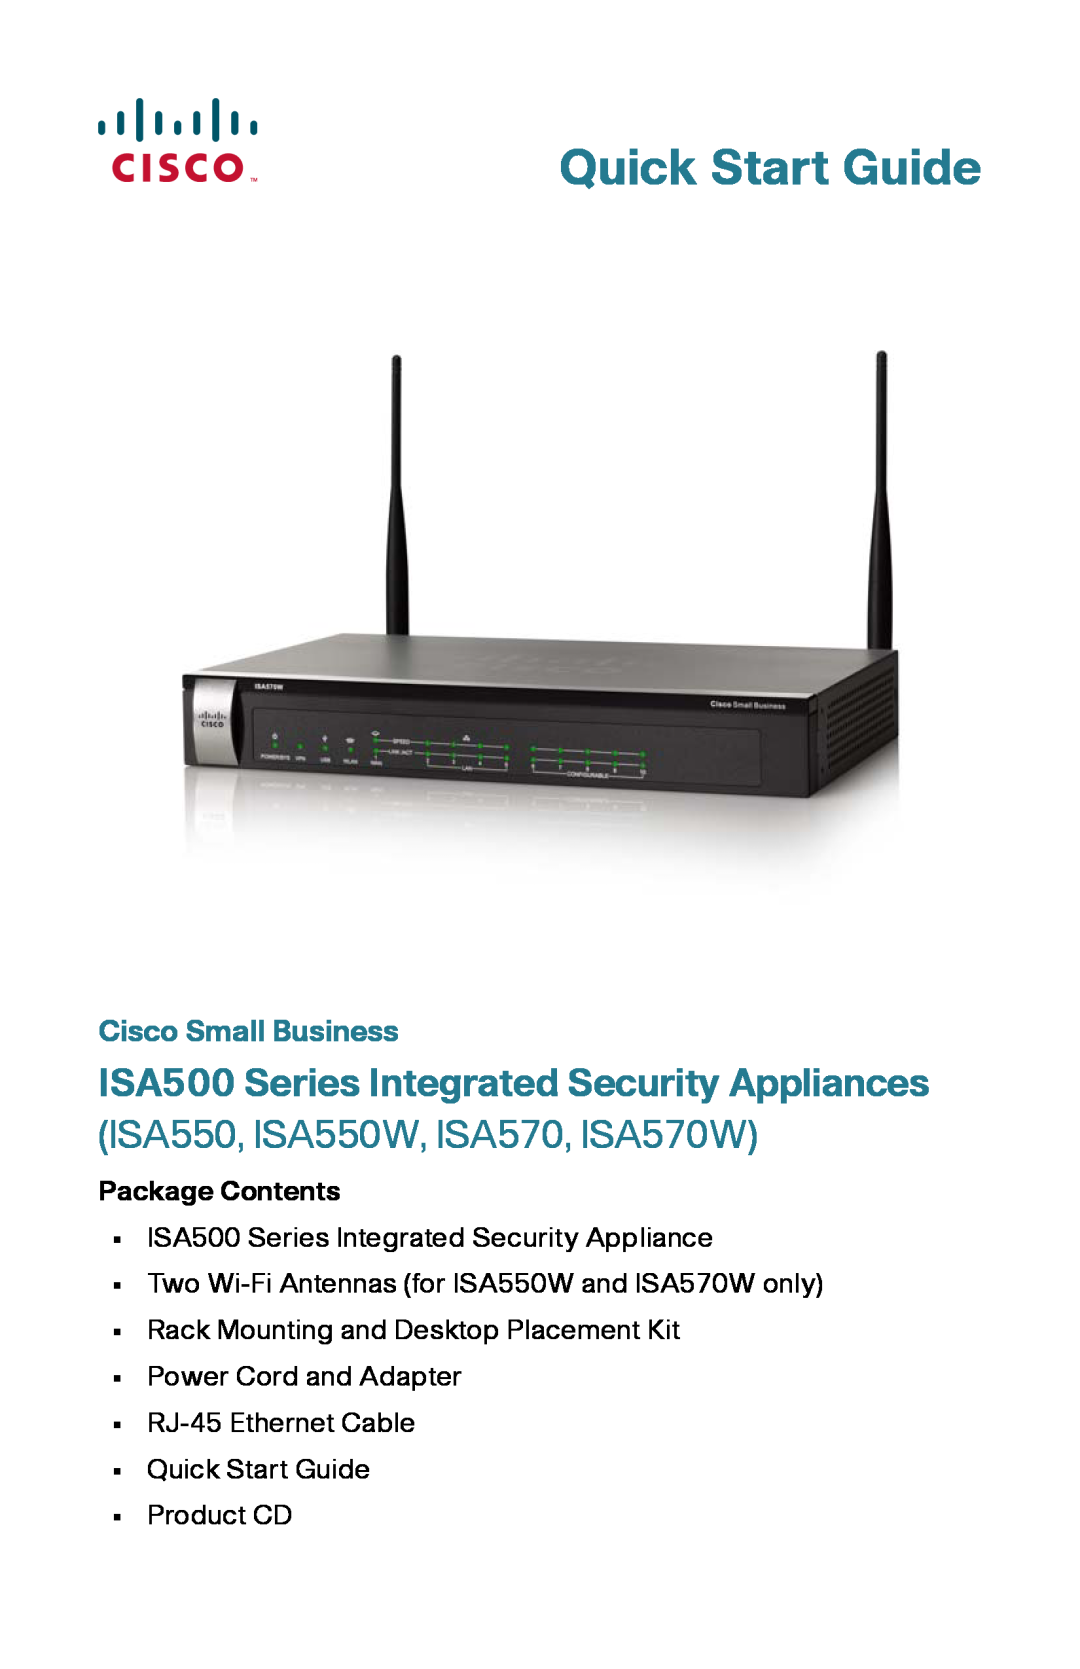 Cisco Systems ISA550W quick start Package Contents, Quick Start Guide, ISA500 Series Integrated Security Appliances 